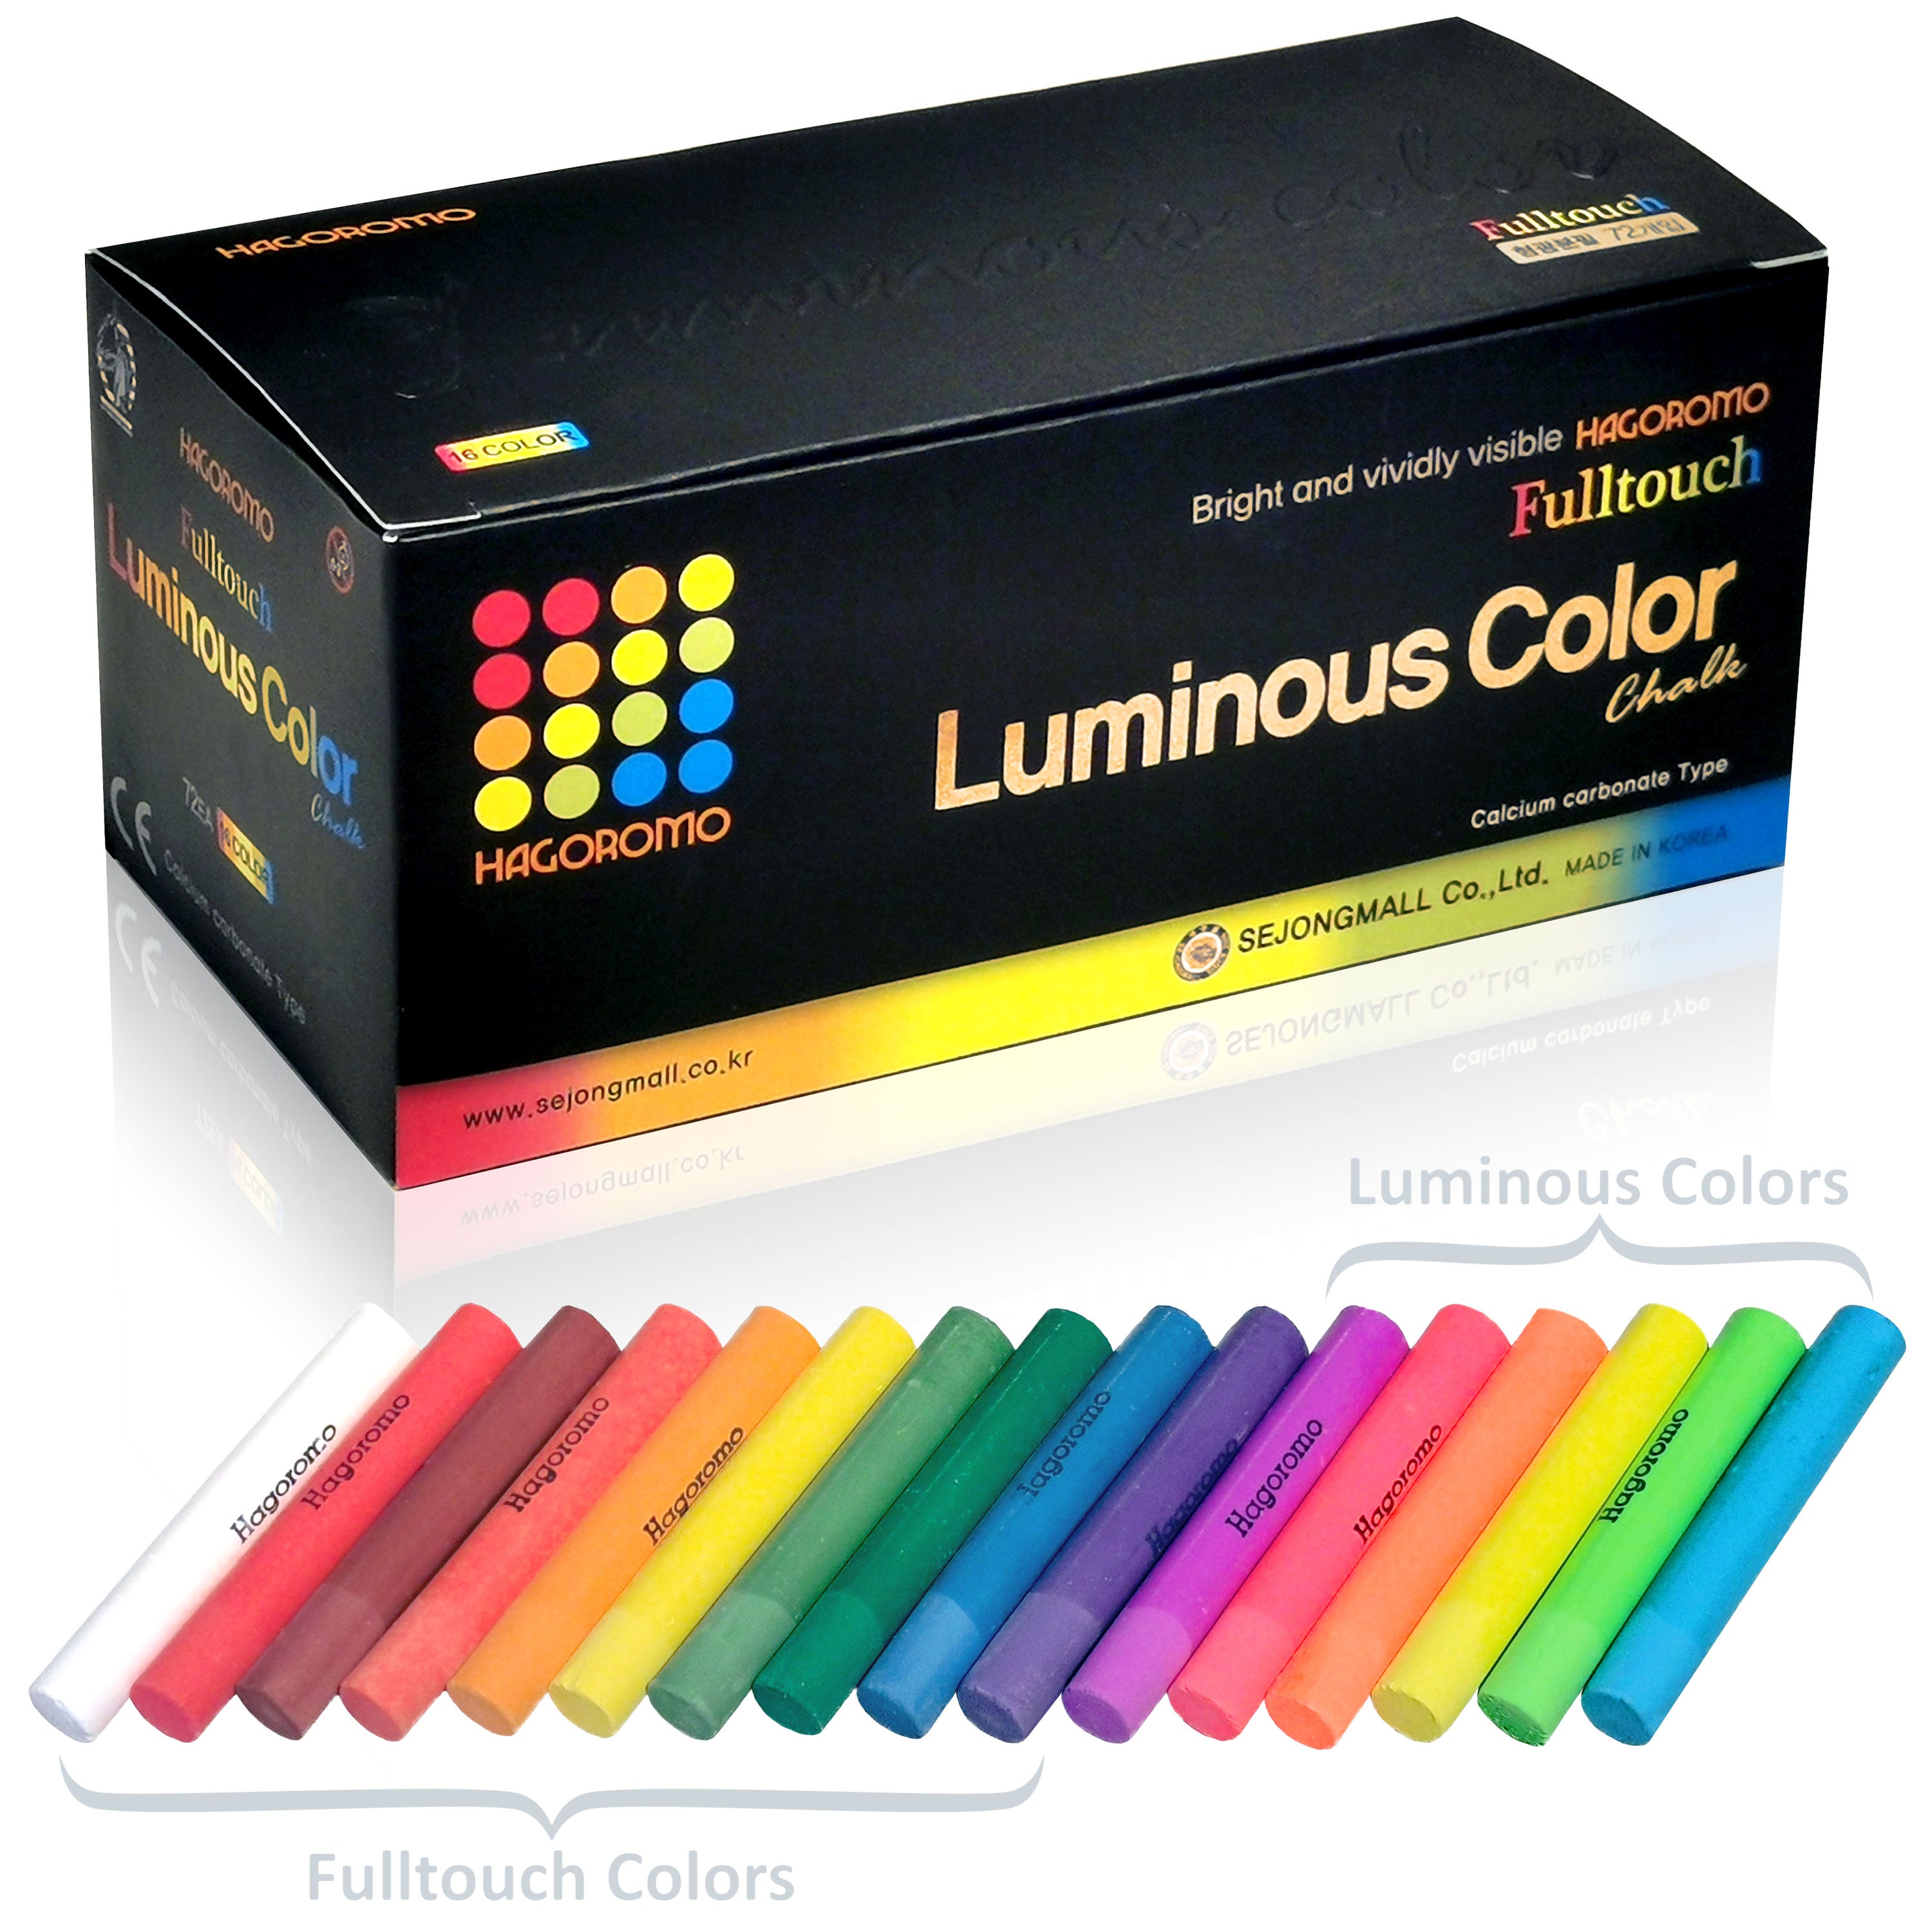 HAGOROMO Fulltouch Color Chalk Non-Toxic - [12 Pcs/10 Color Mix] 1 Box,  Dustless Washable Chalk for Kids, Professional Use